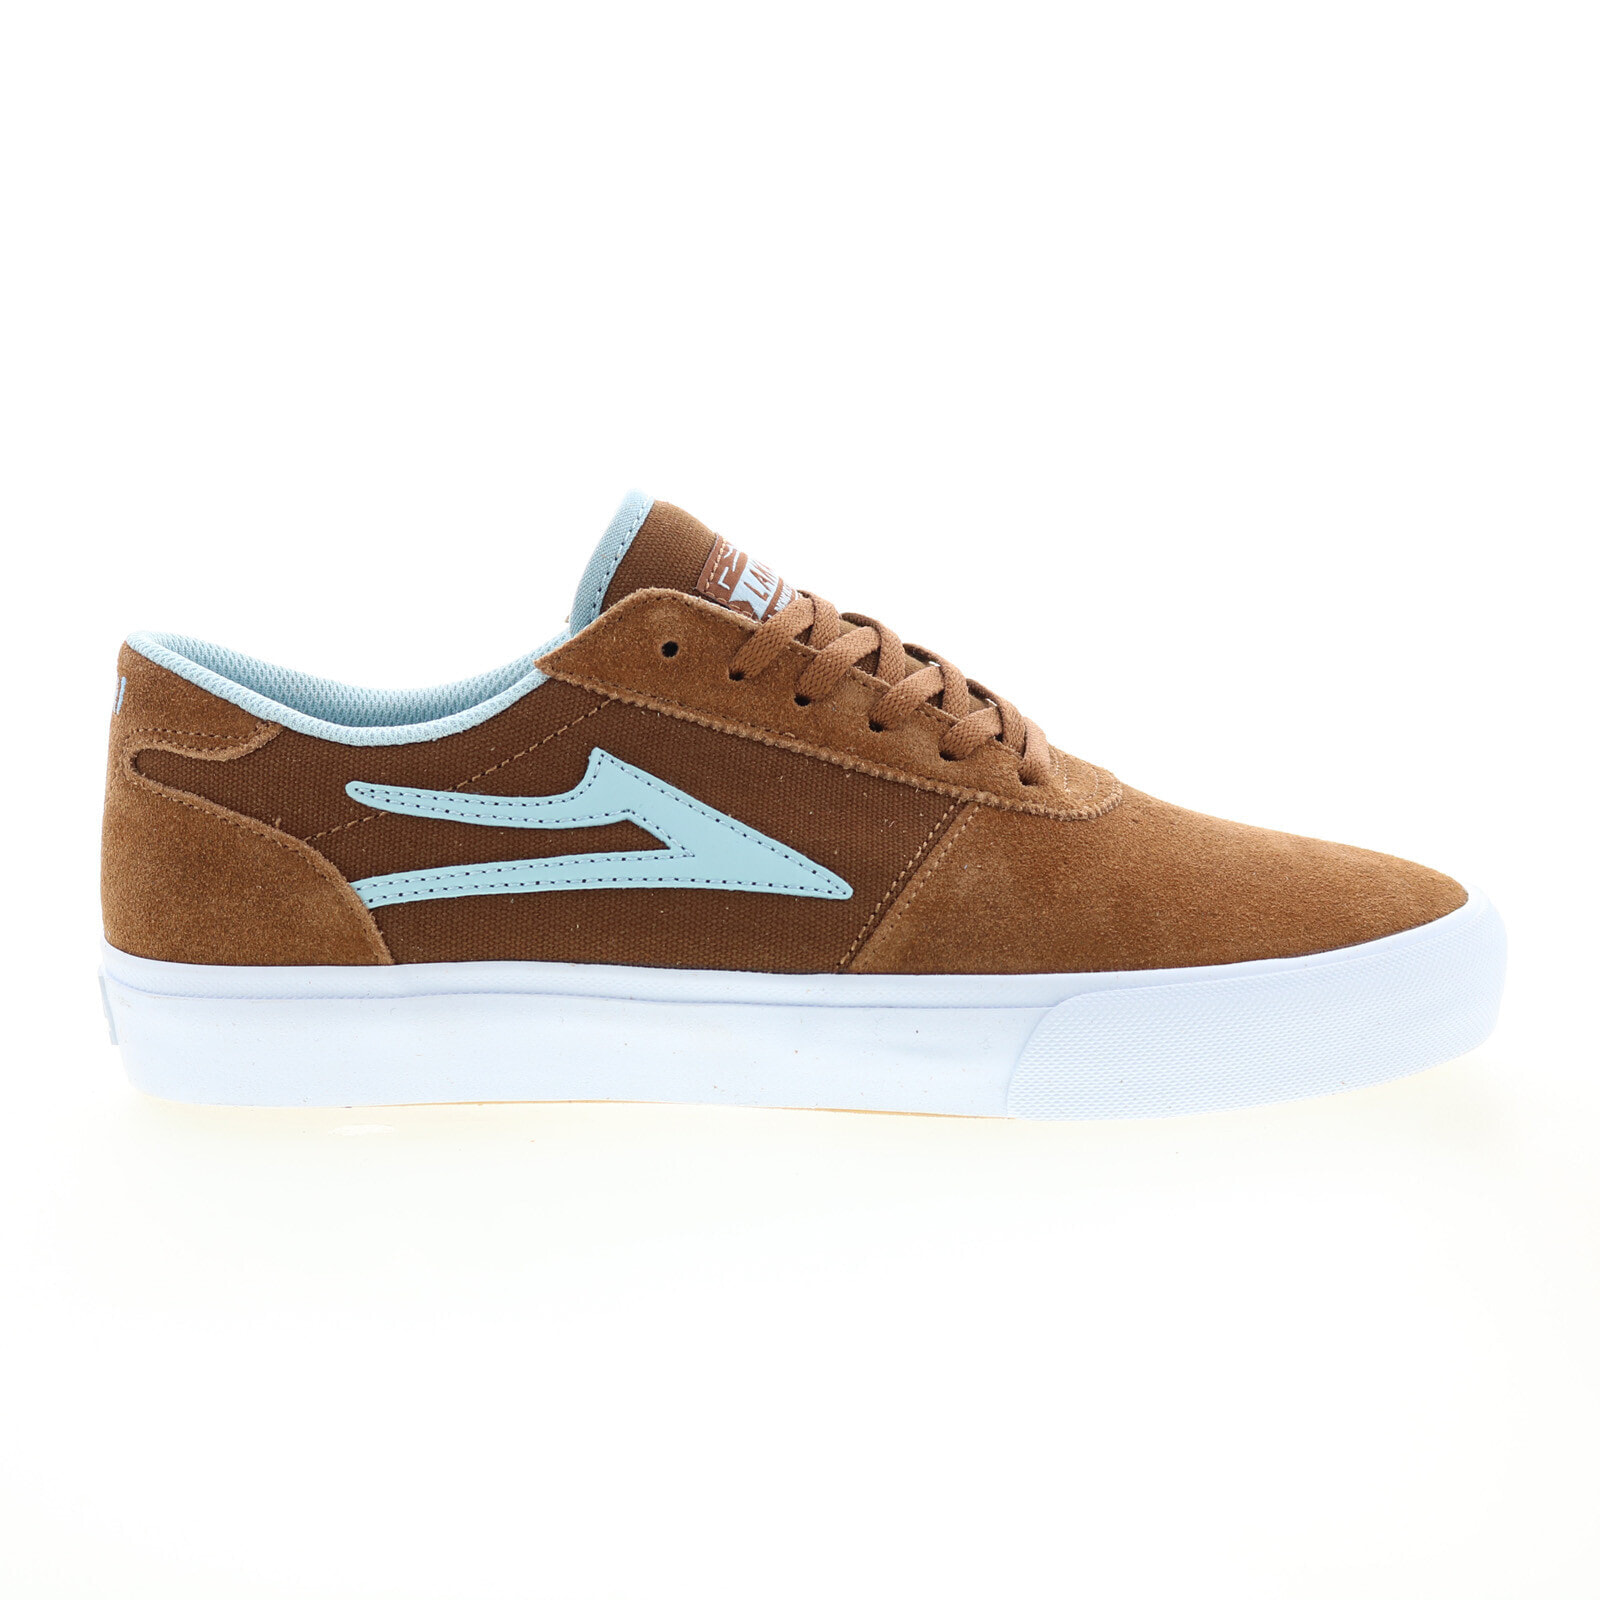 Lakai Manchester MS1240200A00 Mens Brown Skate Inspired Sneakers Shoes